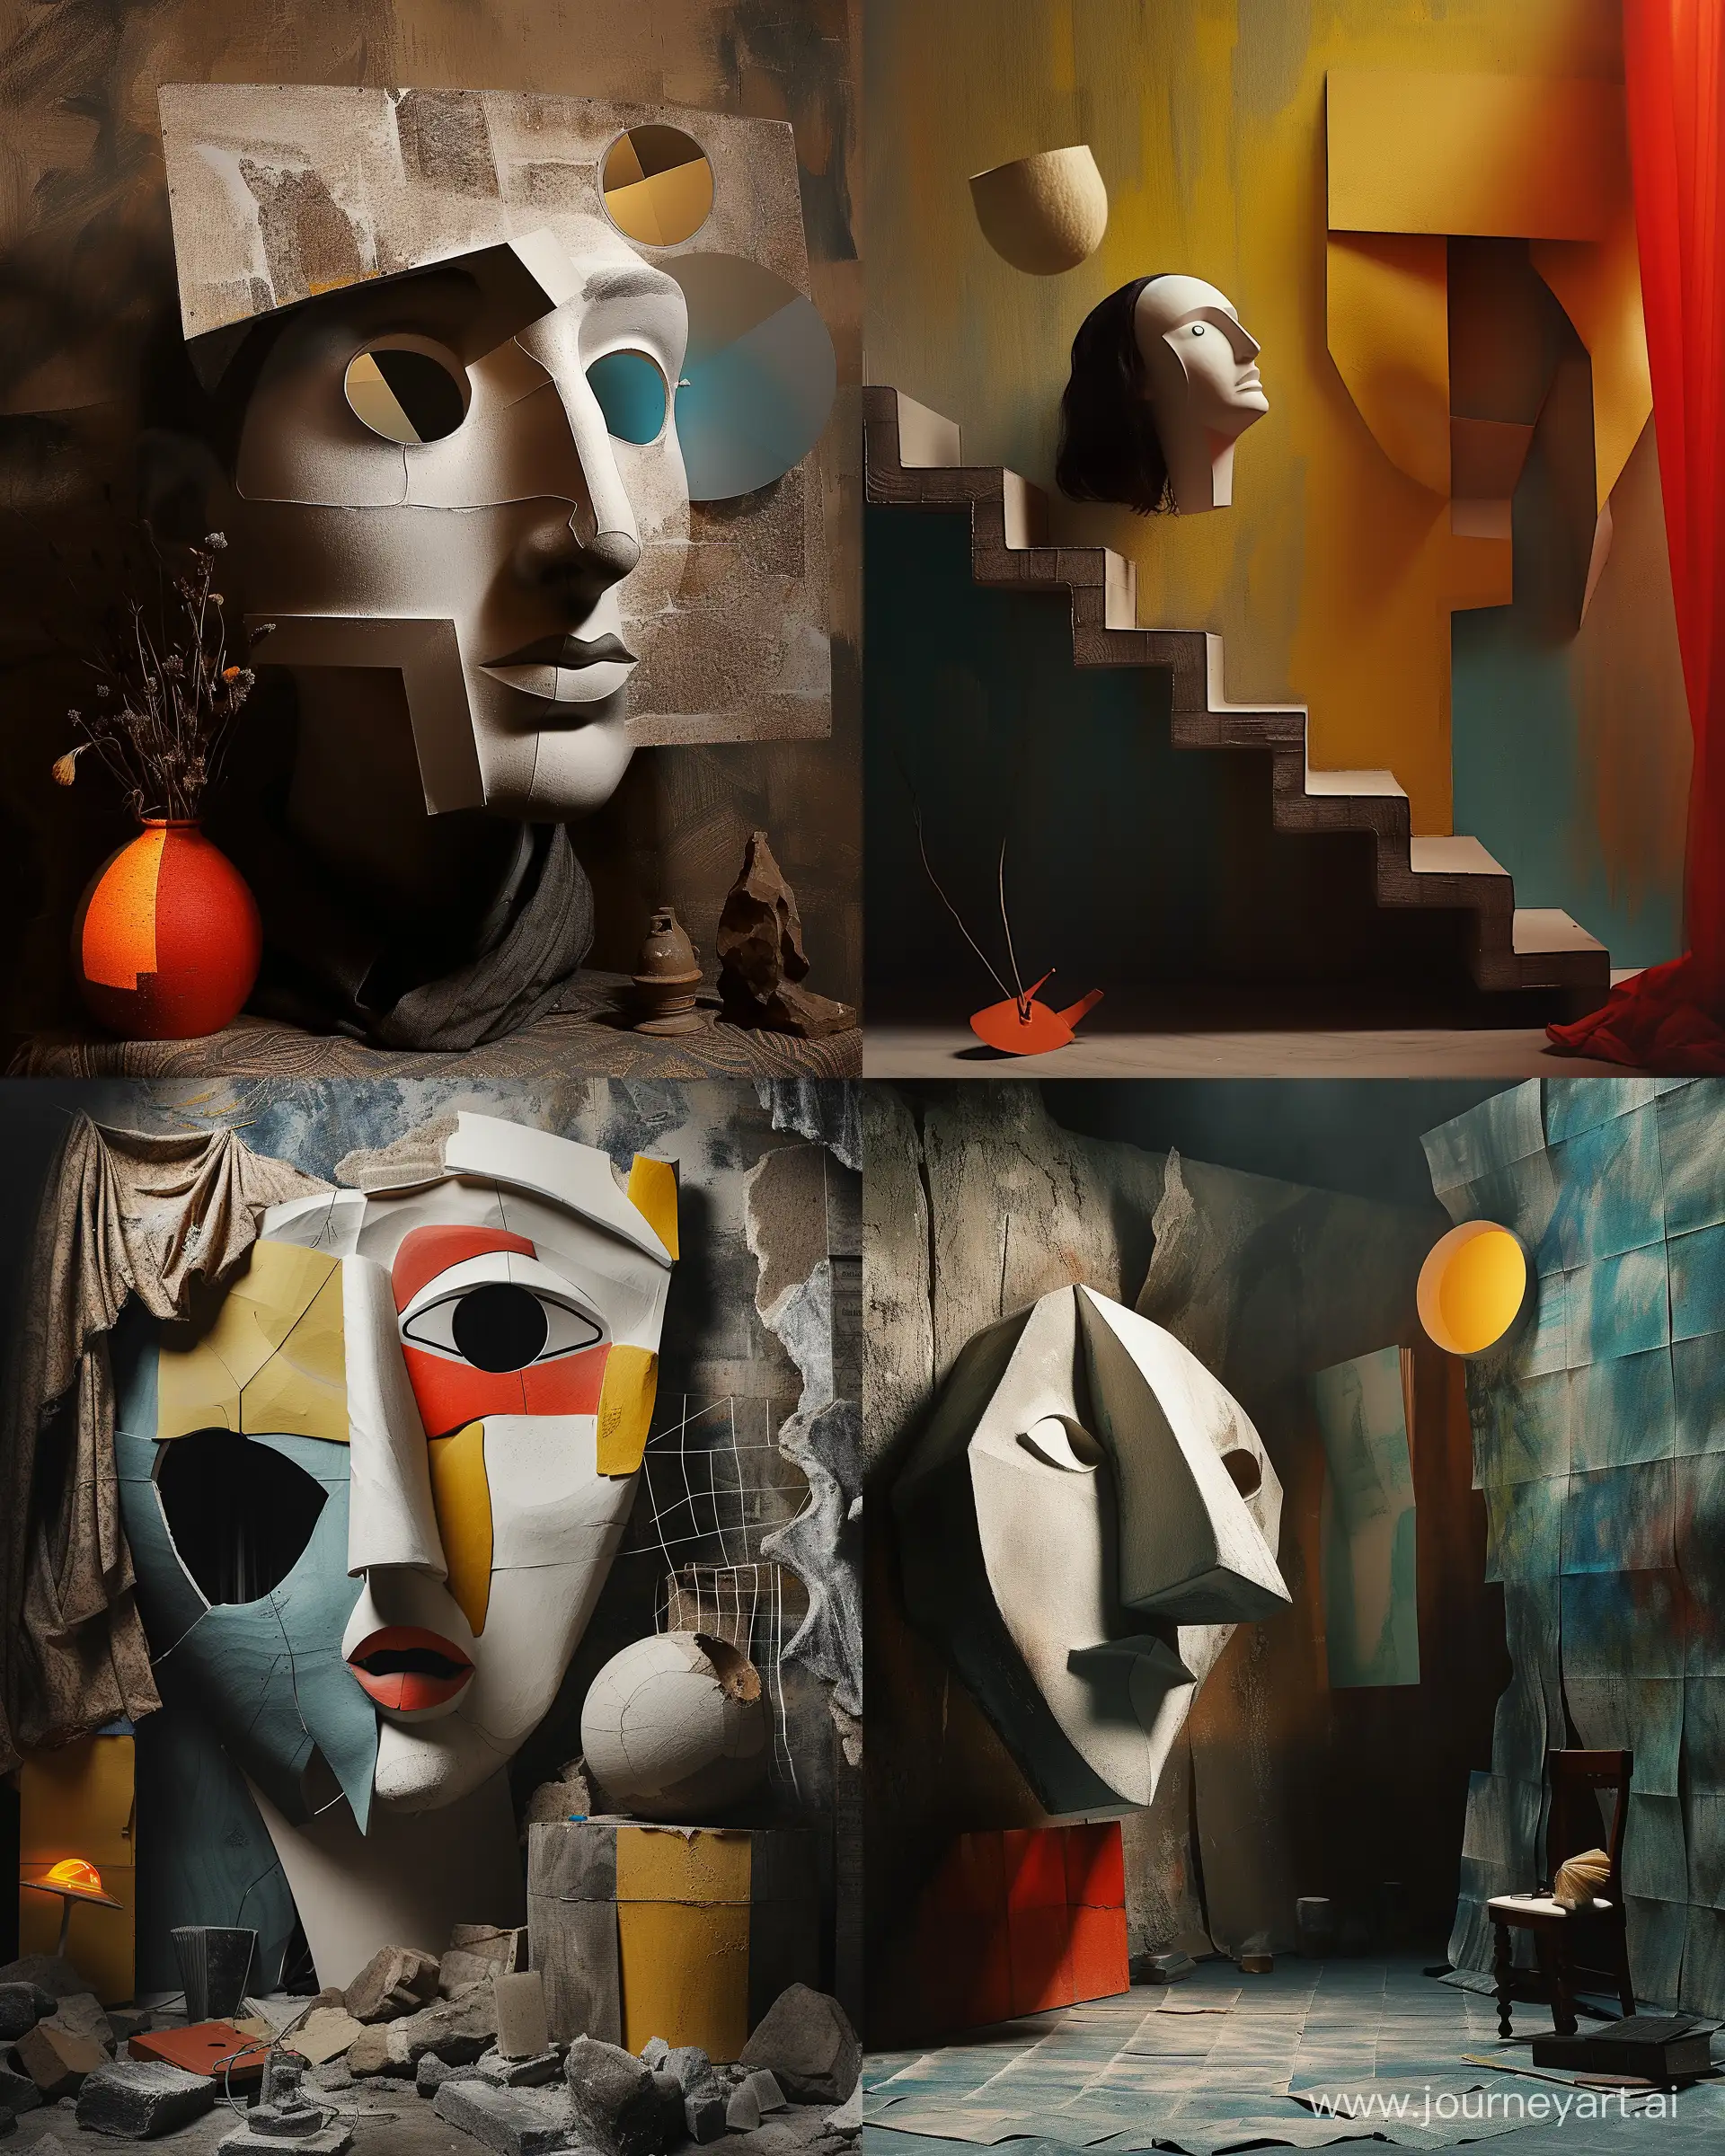 Surreal-Cubist-Staged-Photography-with-PicassoInspired-Atmosphere